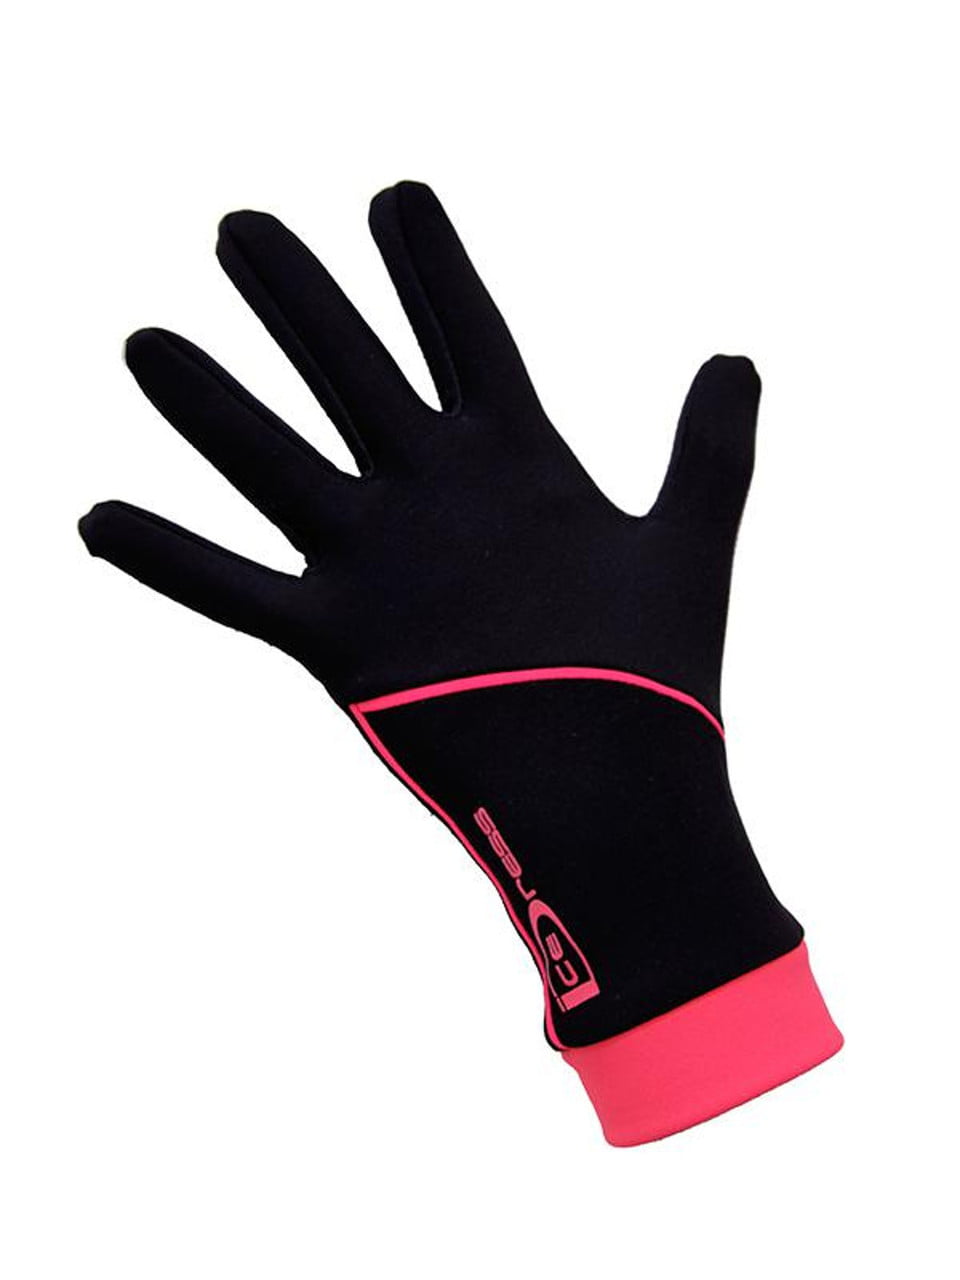 IceDress Thermal Figure Skating Gloves with Flounce CL (10-12)